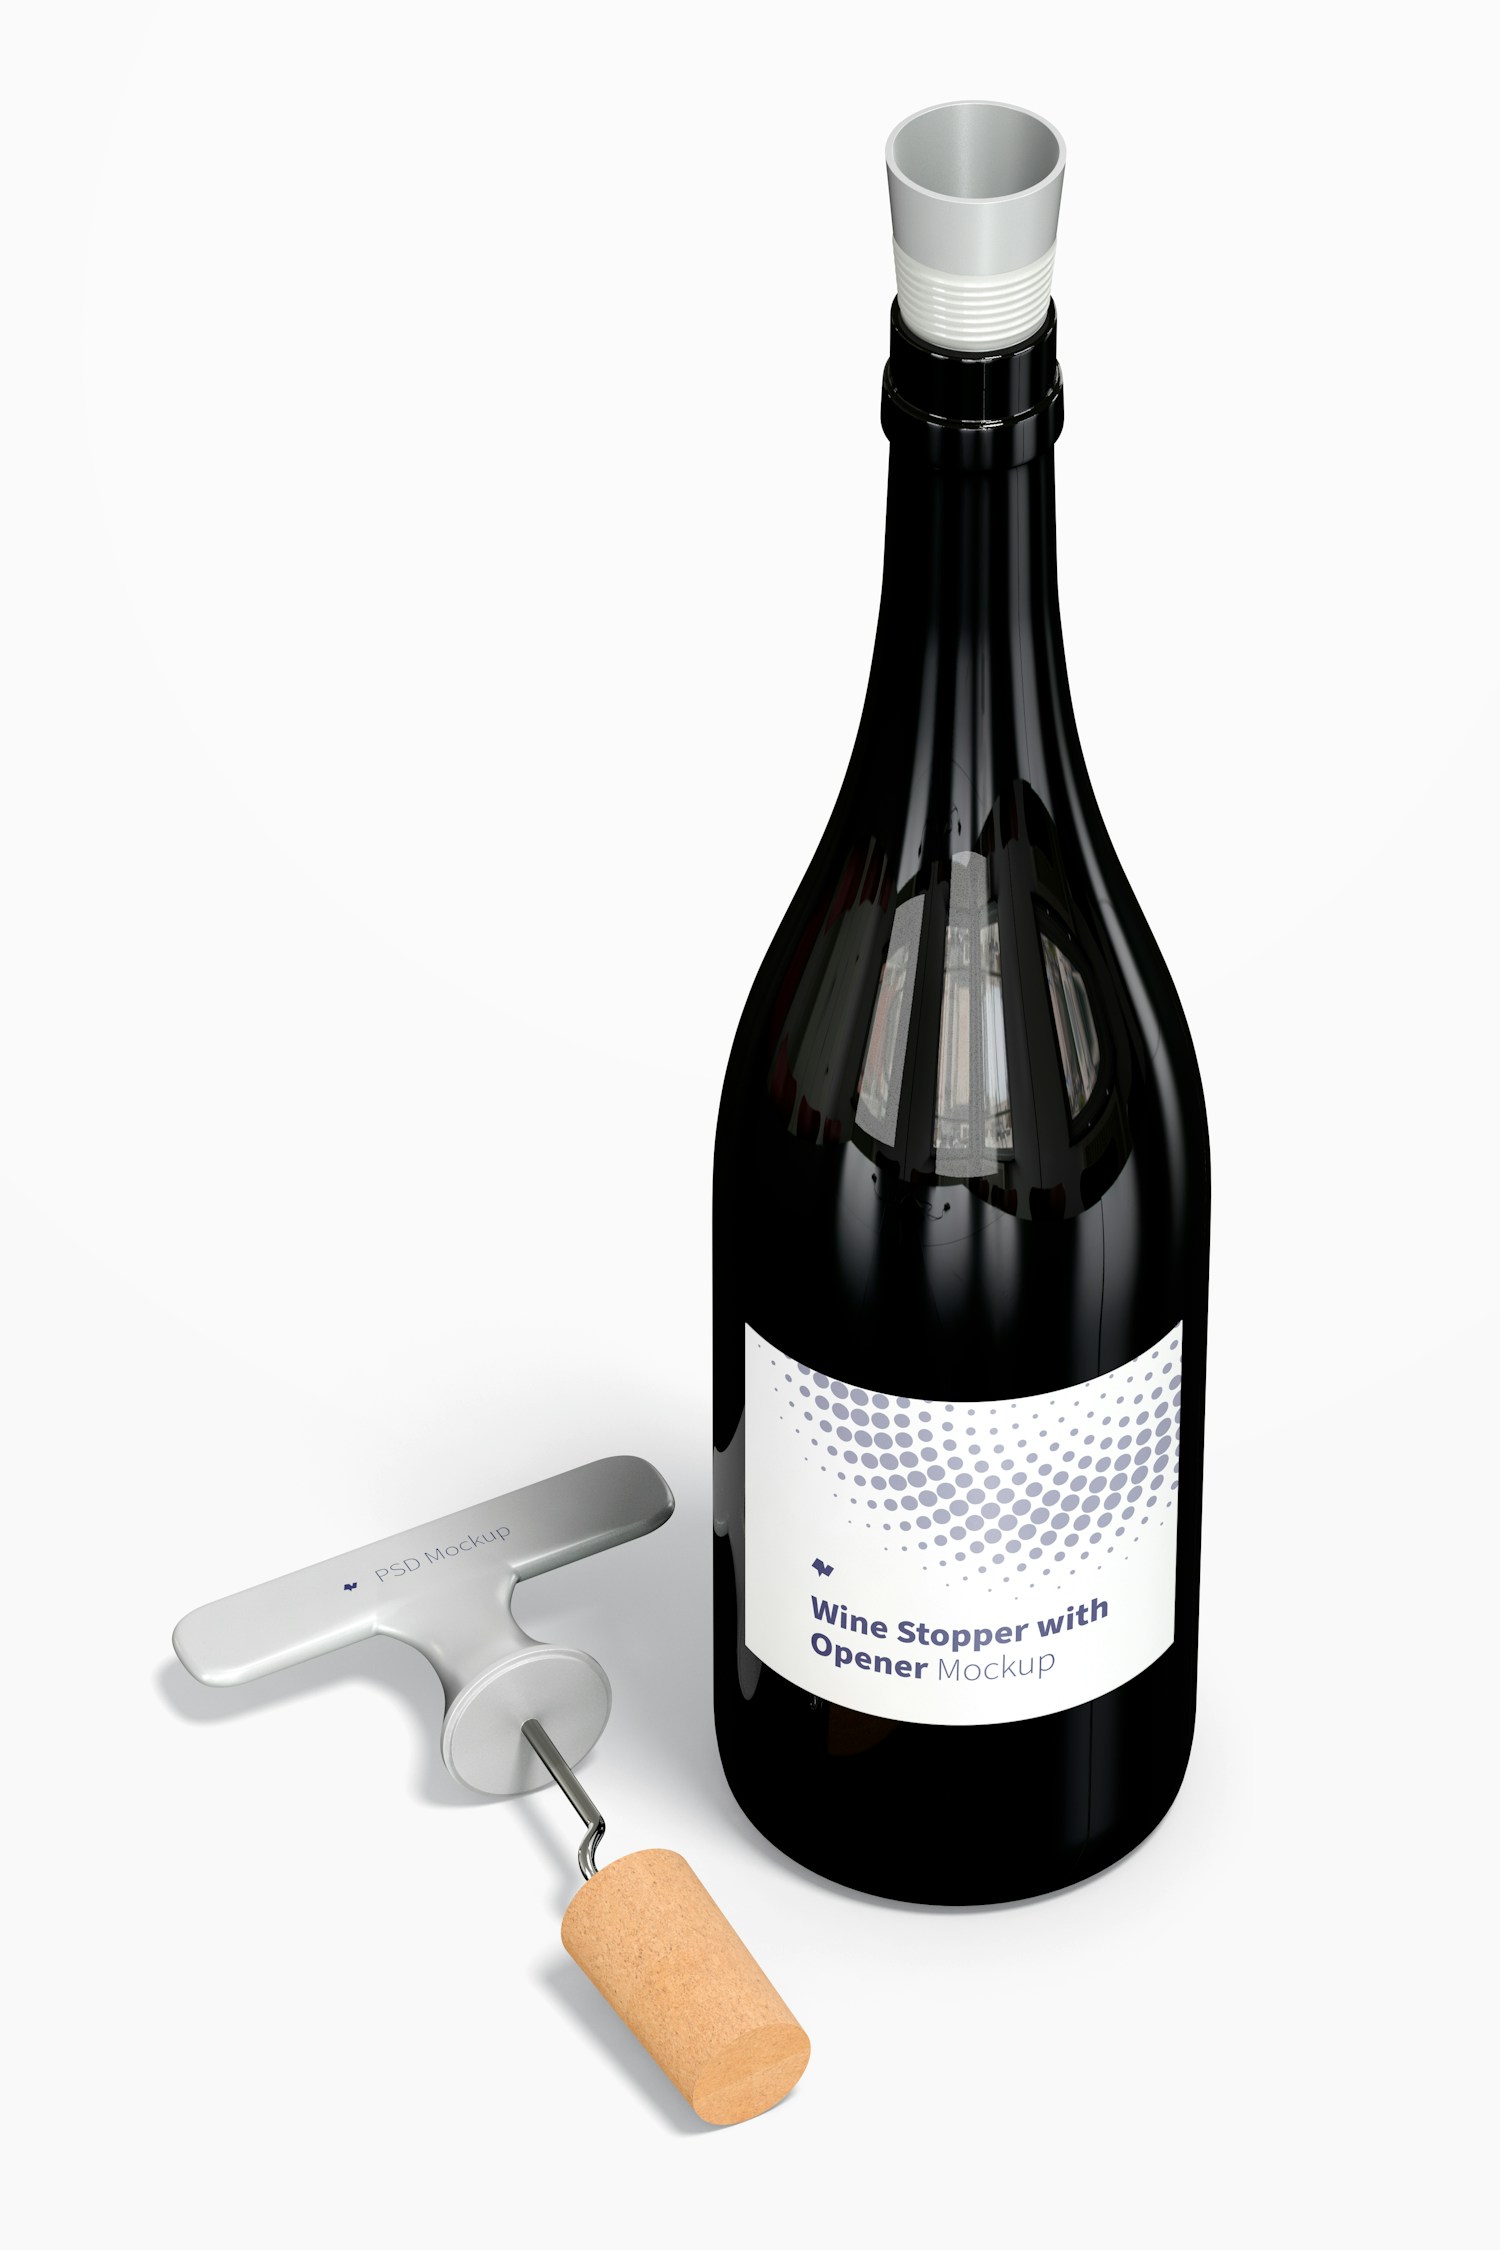 Wine Stopper with Opener and Bottle Mockup